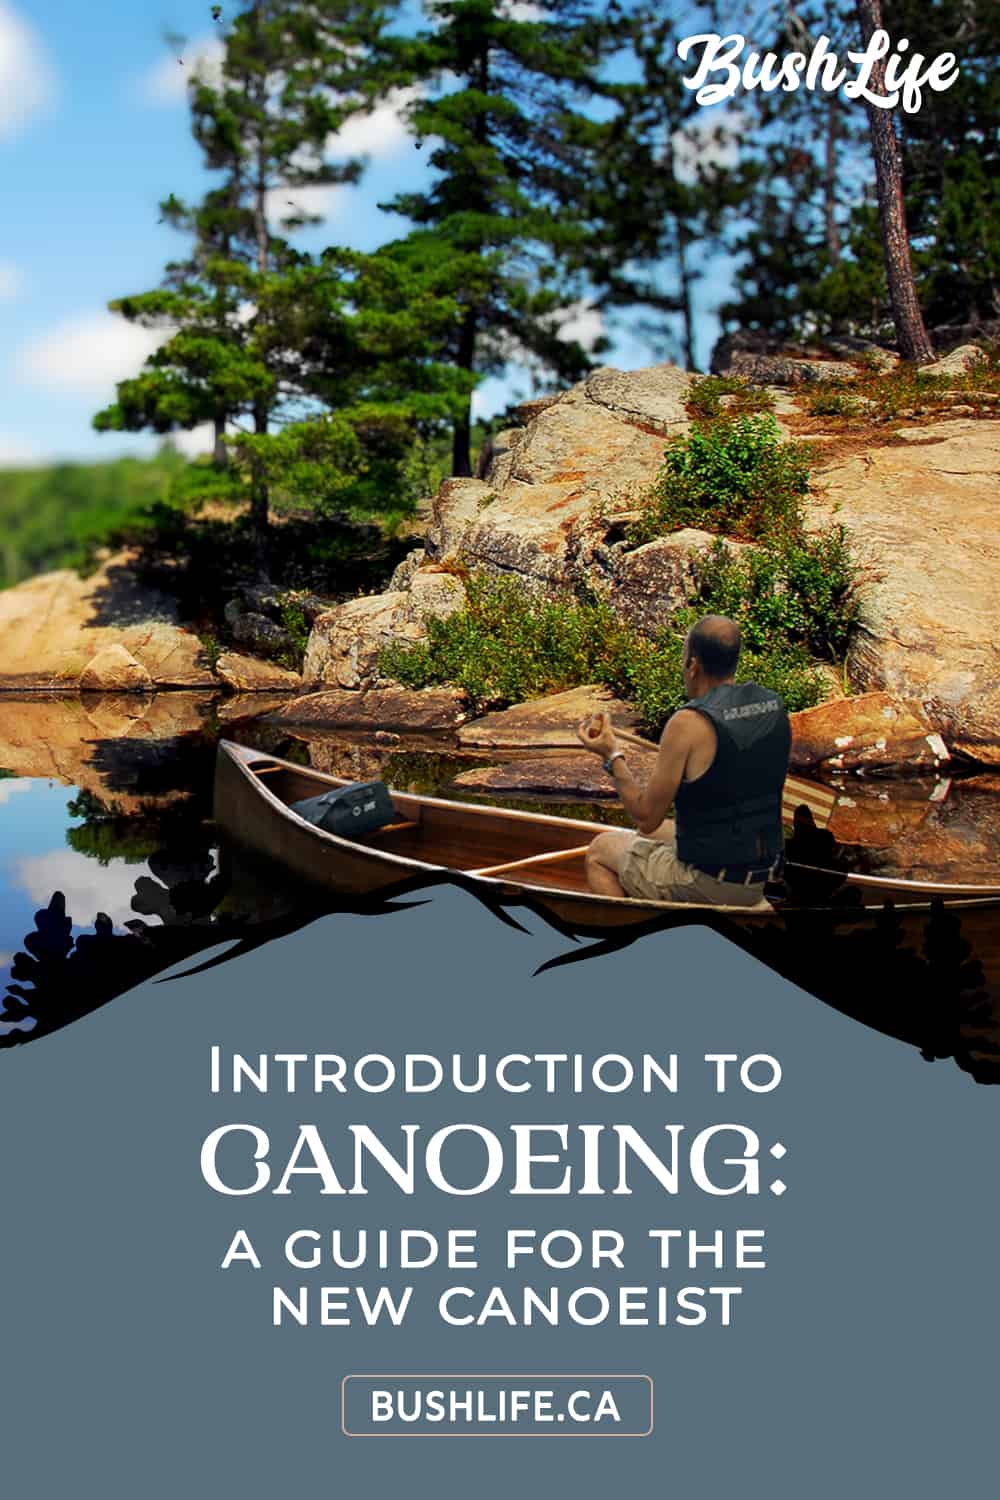 Introduction to Canoeing: A Guide for the New Canoeist